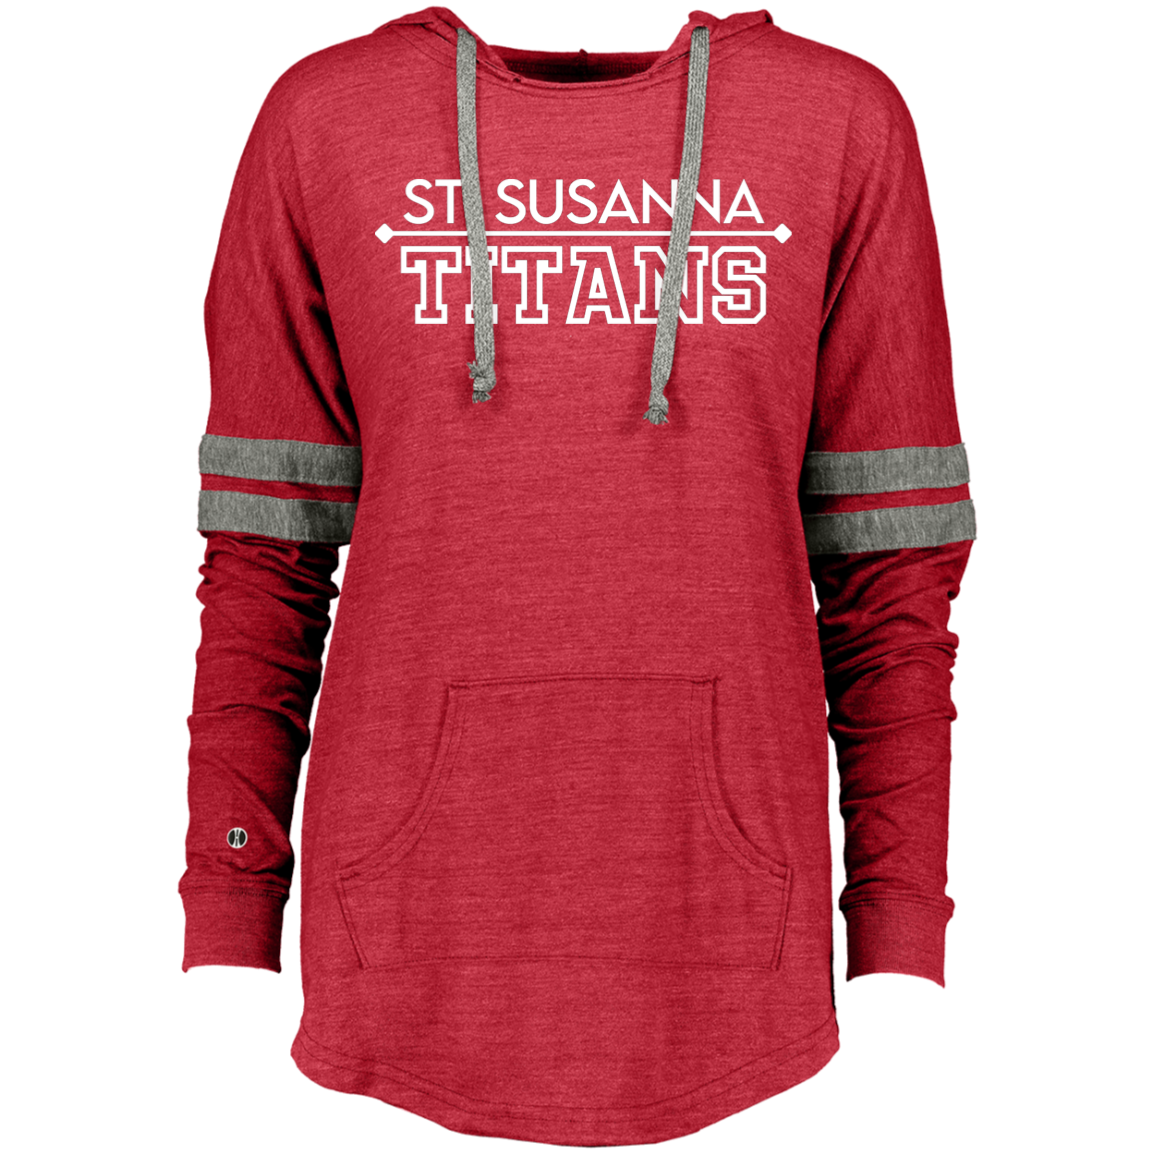 St. Susanna Titans Ladies Hooded Low Key Pullover